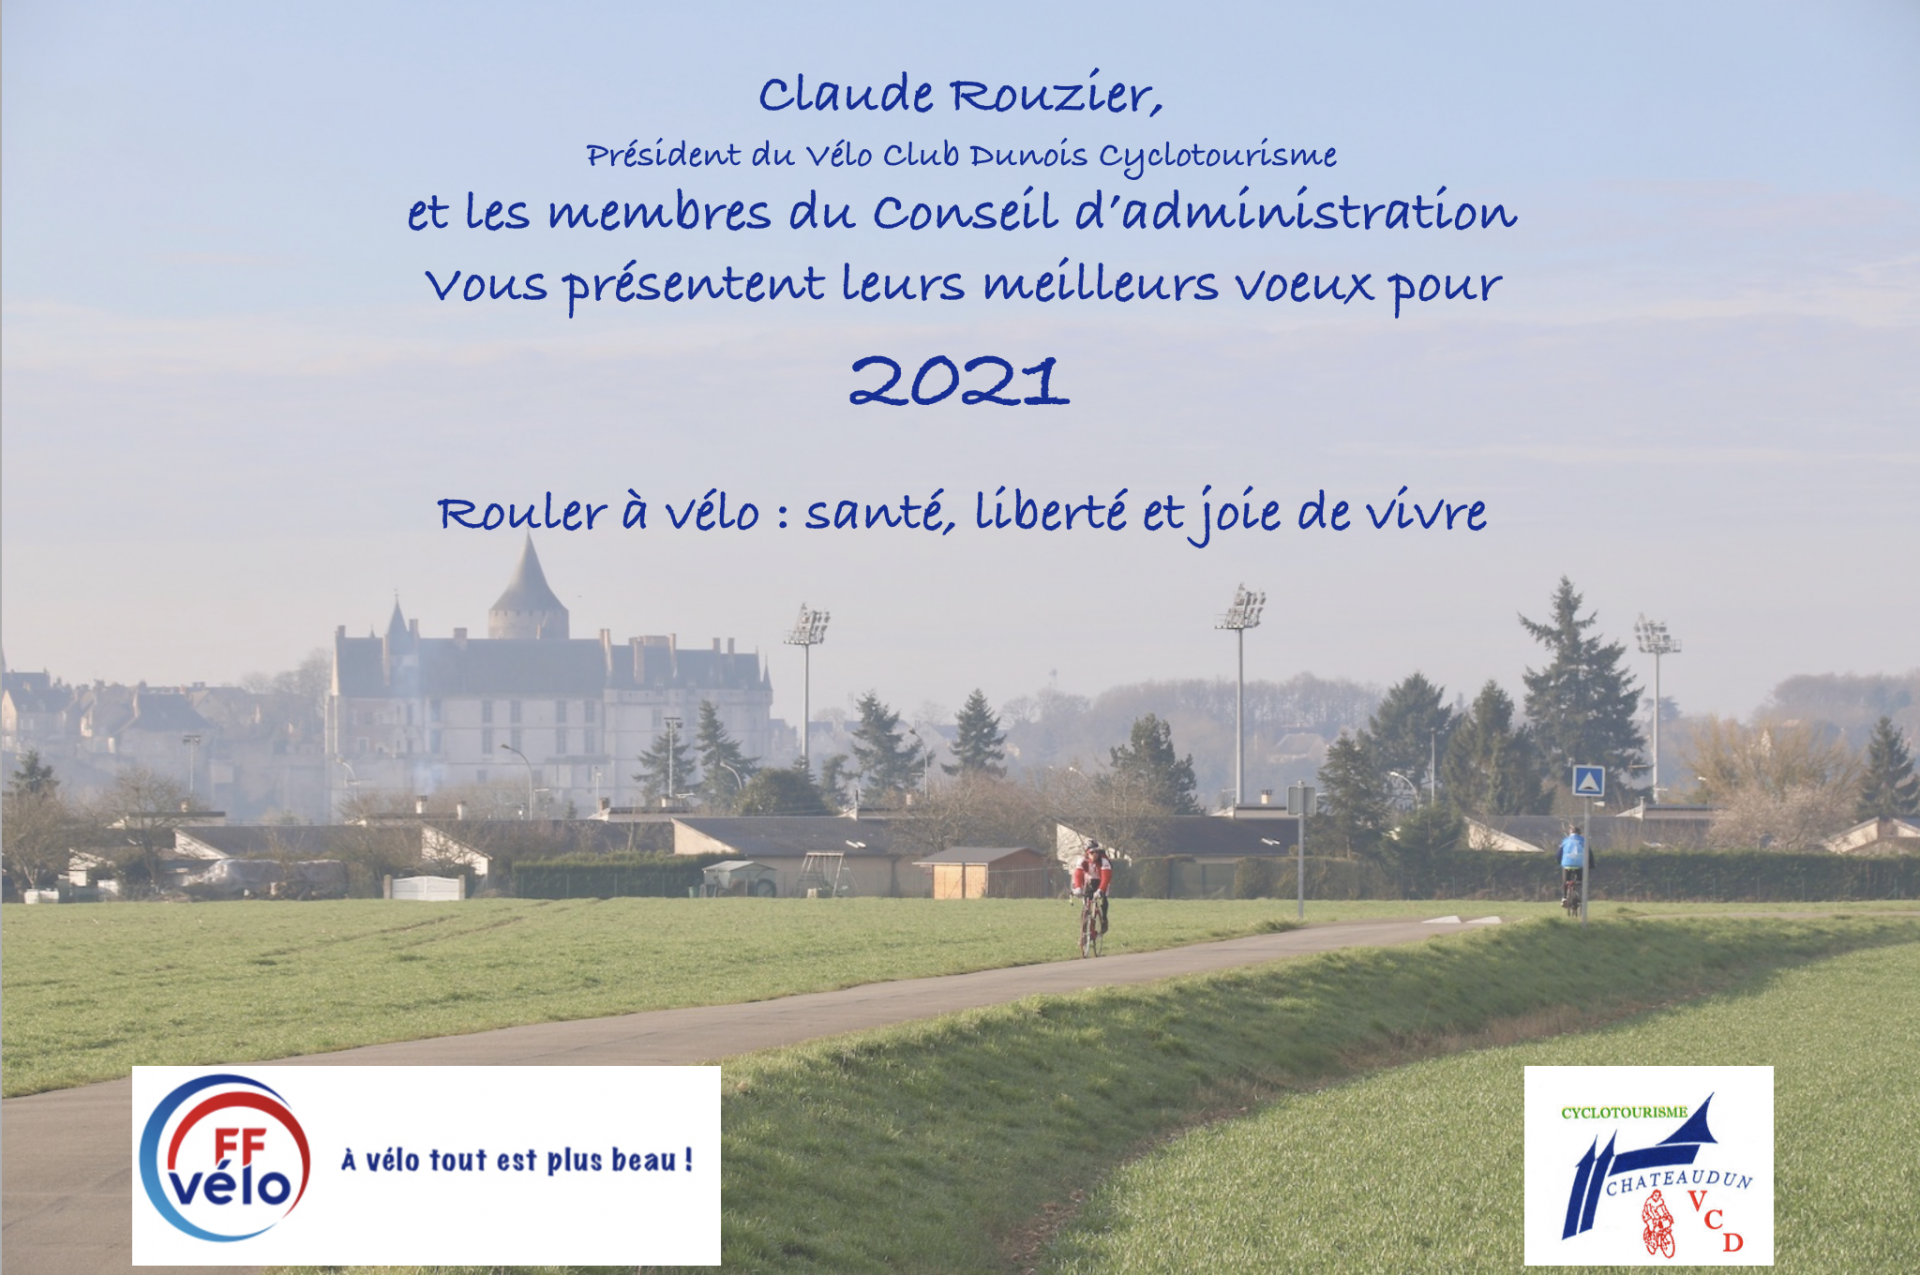 Voeux vcd 2021